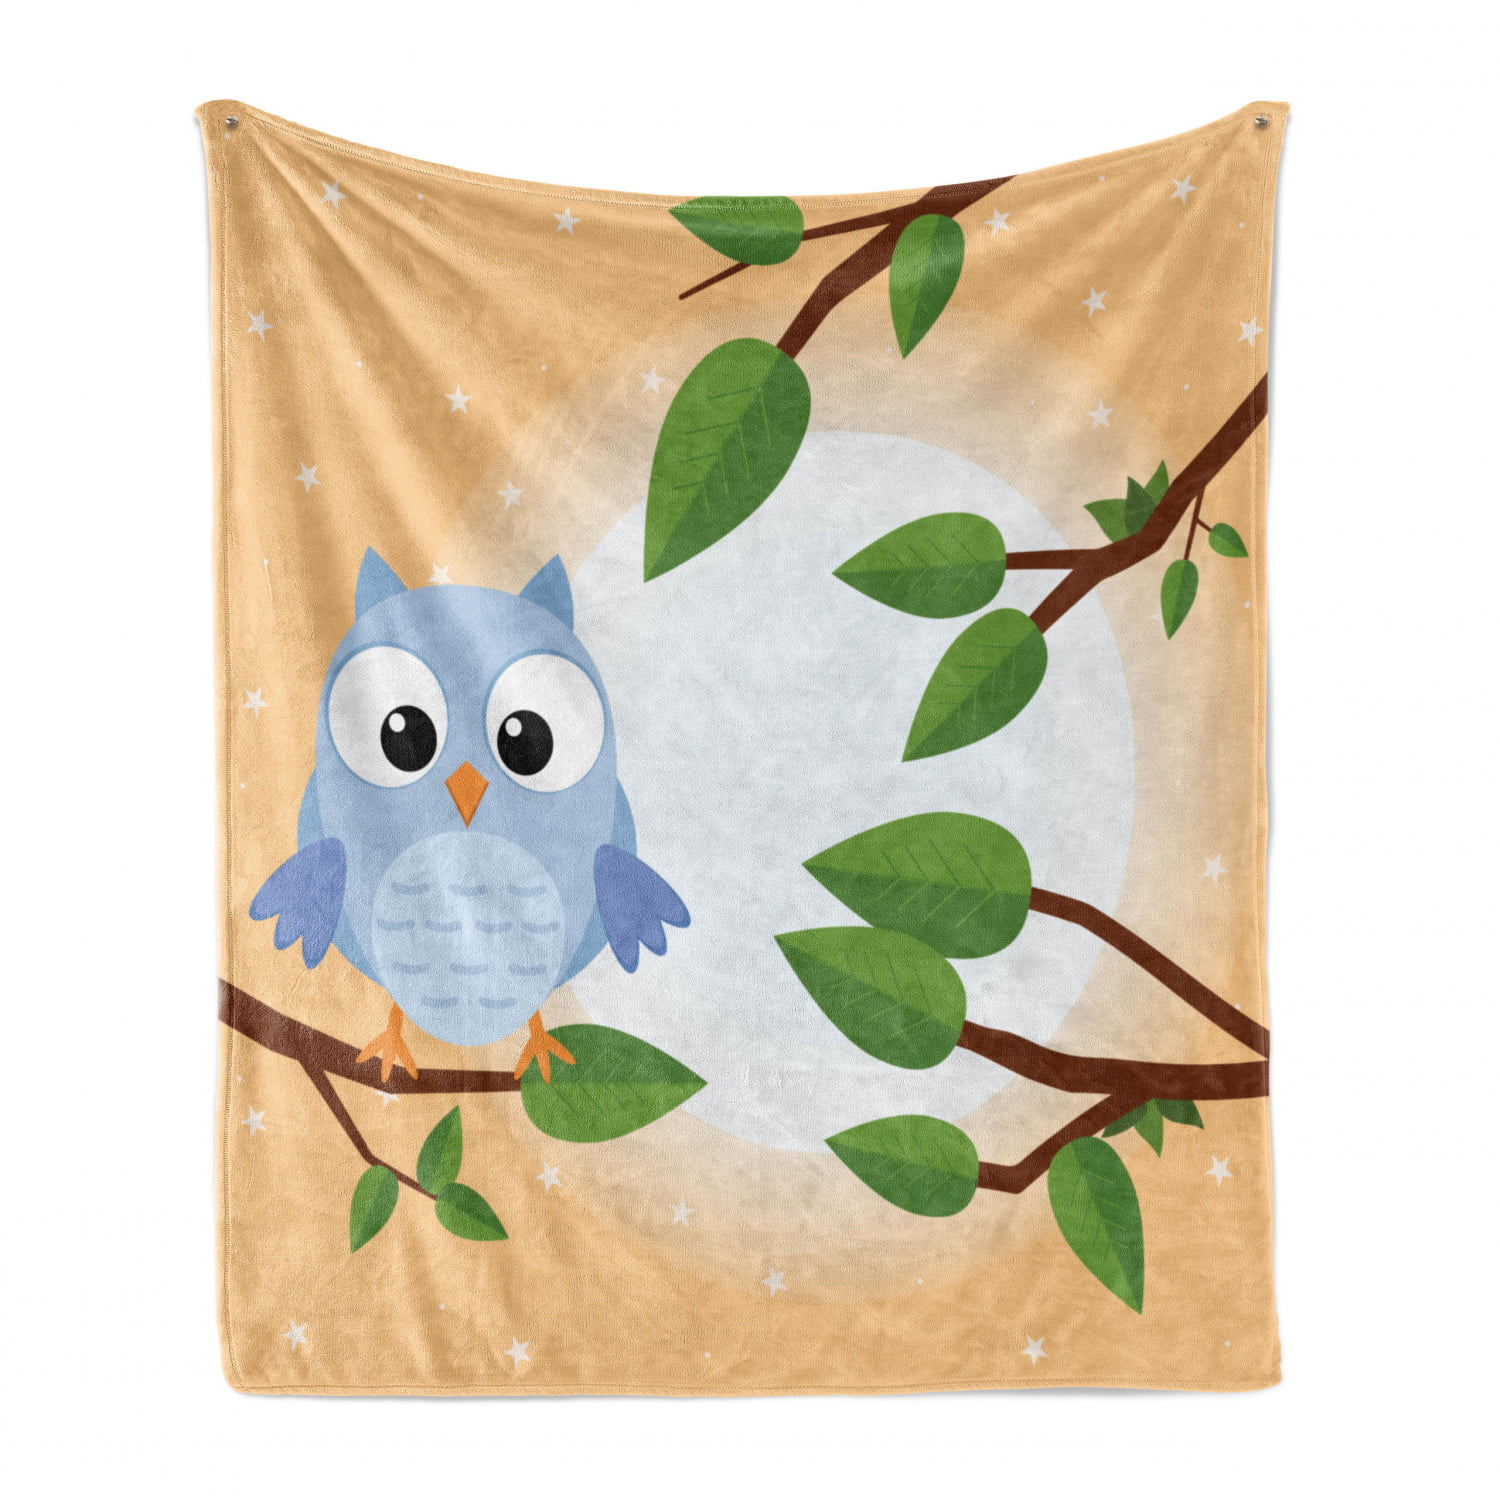 Details about   3D Flying Owl NAO251 Warm Plush Fleece Blanket Picnic Sofa Couch Quilt Bed Amy 